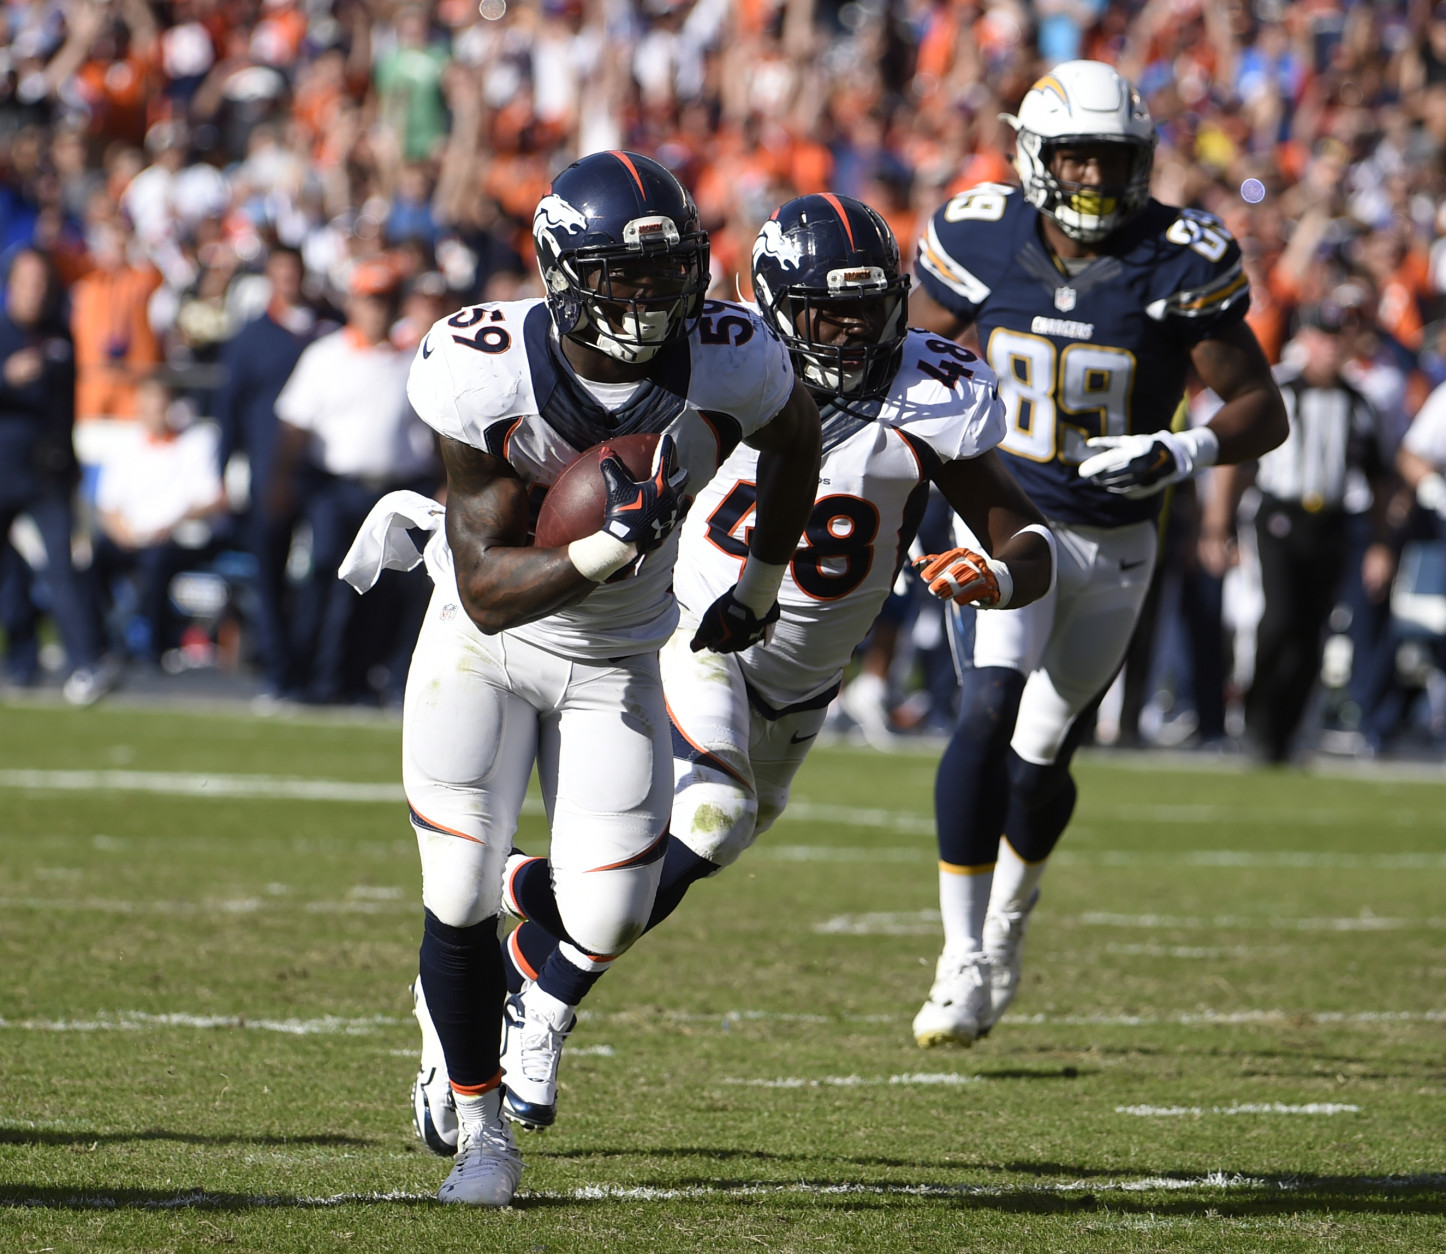 Denver Broncos inside linebacker Danny Trevathan scores on a interception against the San Diego Chargers during the first half in an NFL football game Sunday, Dec. 6, 2015, in San Diego. (AP Photo/Denis Poroy)